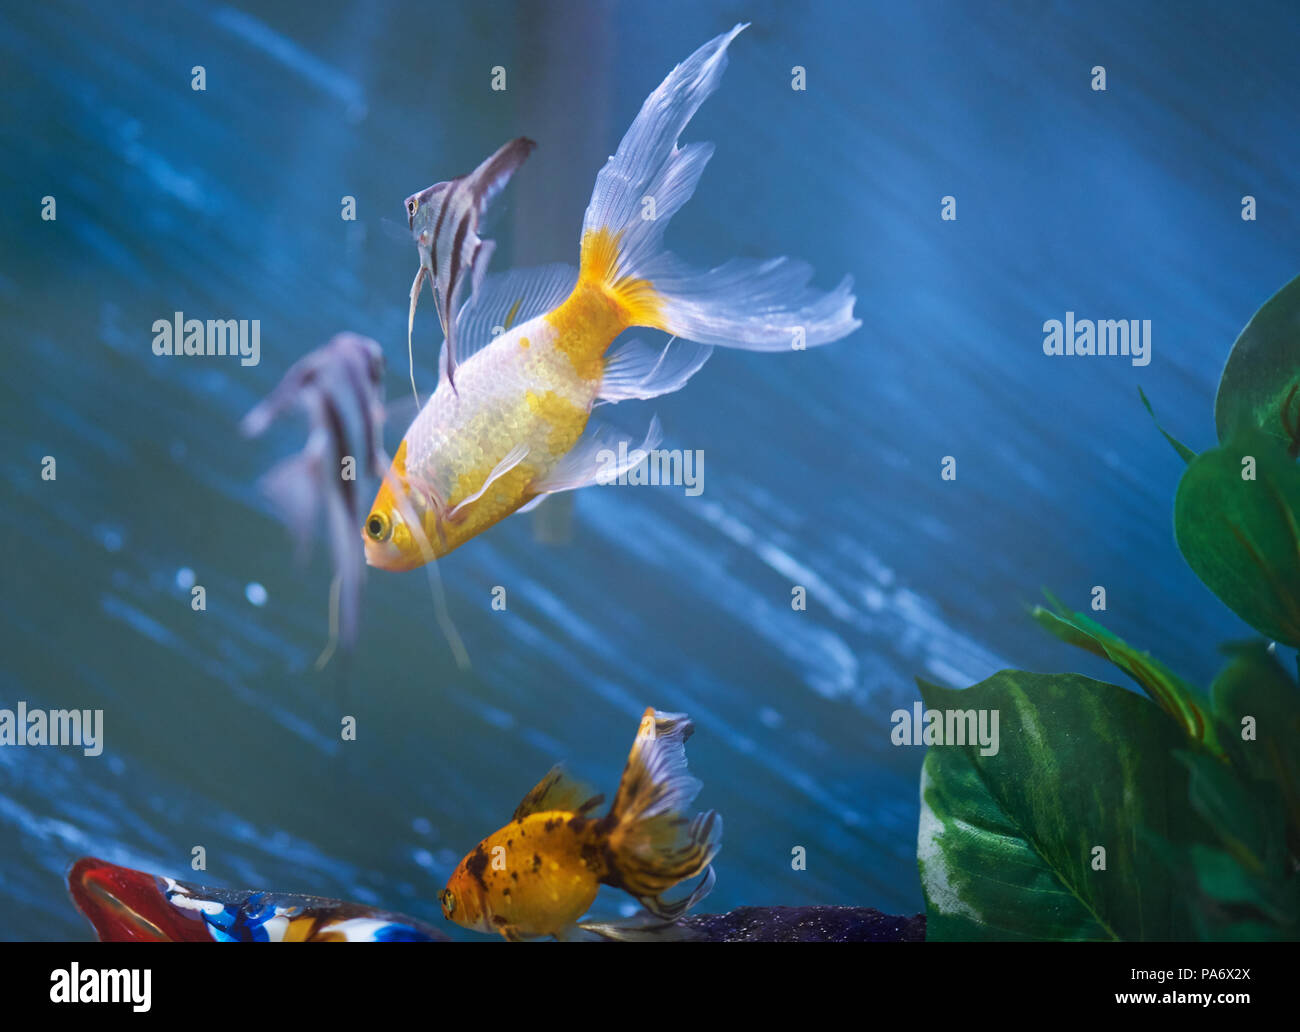 Life in aquarium theme. Colorful small fishes swimming in blue water Stock Photo